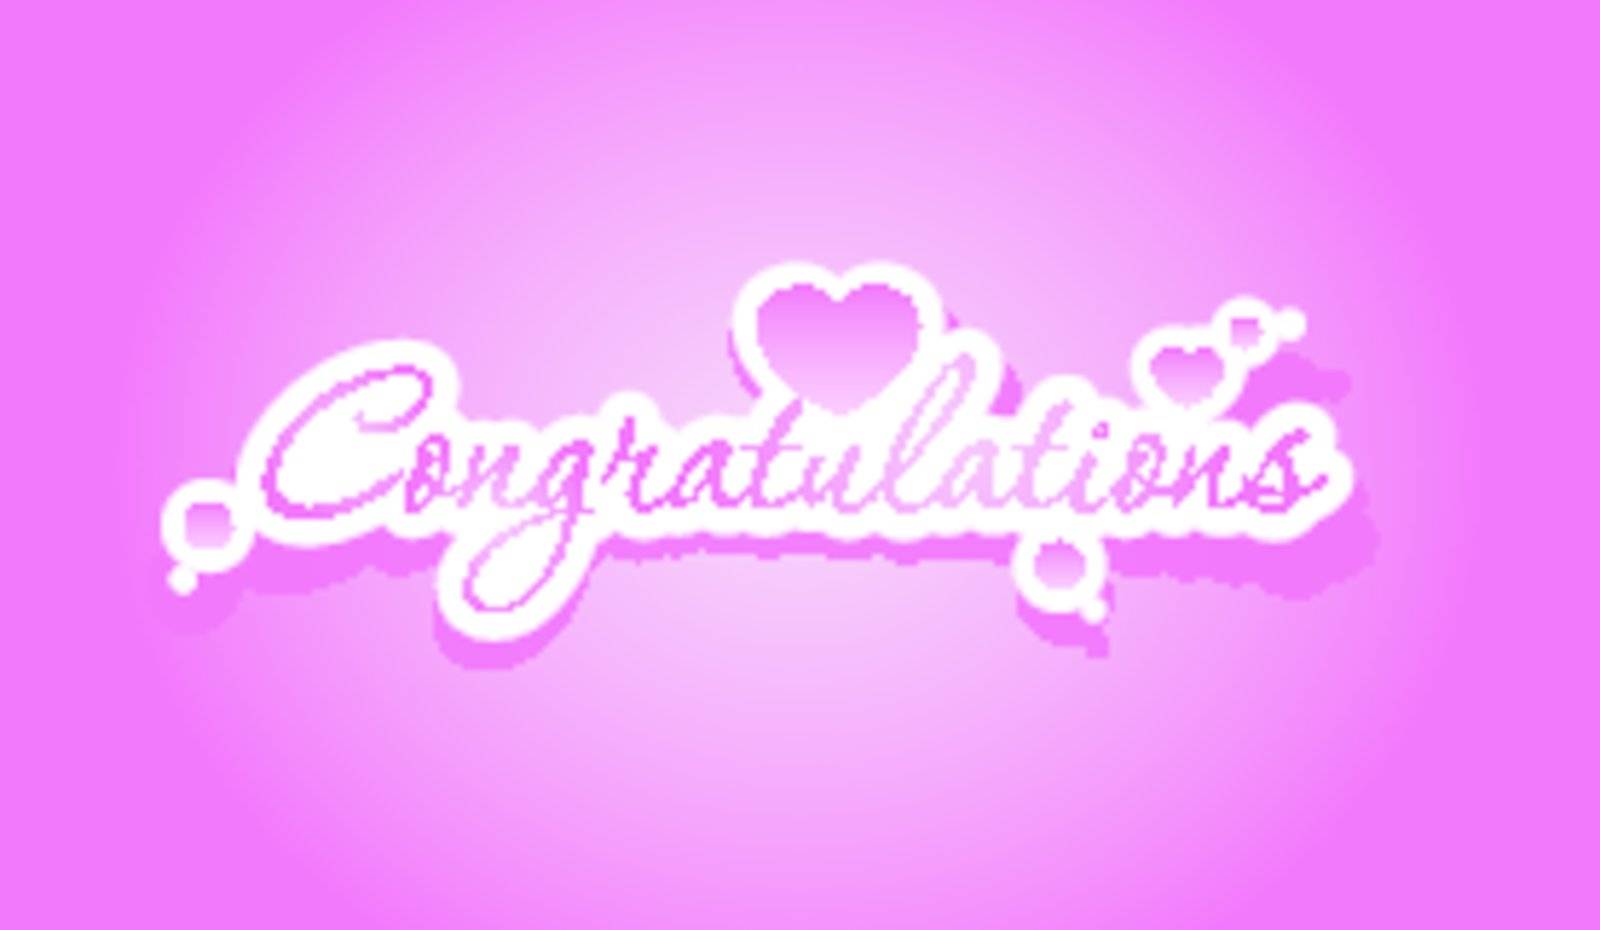 Congratulations lettering on pink background. Vector illustration.